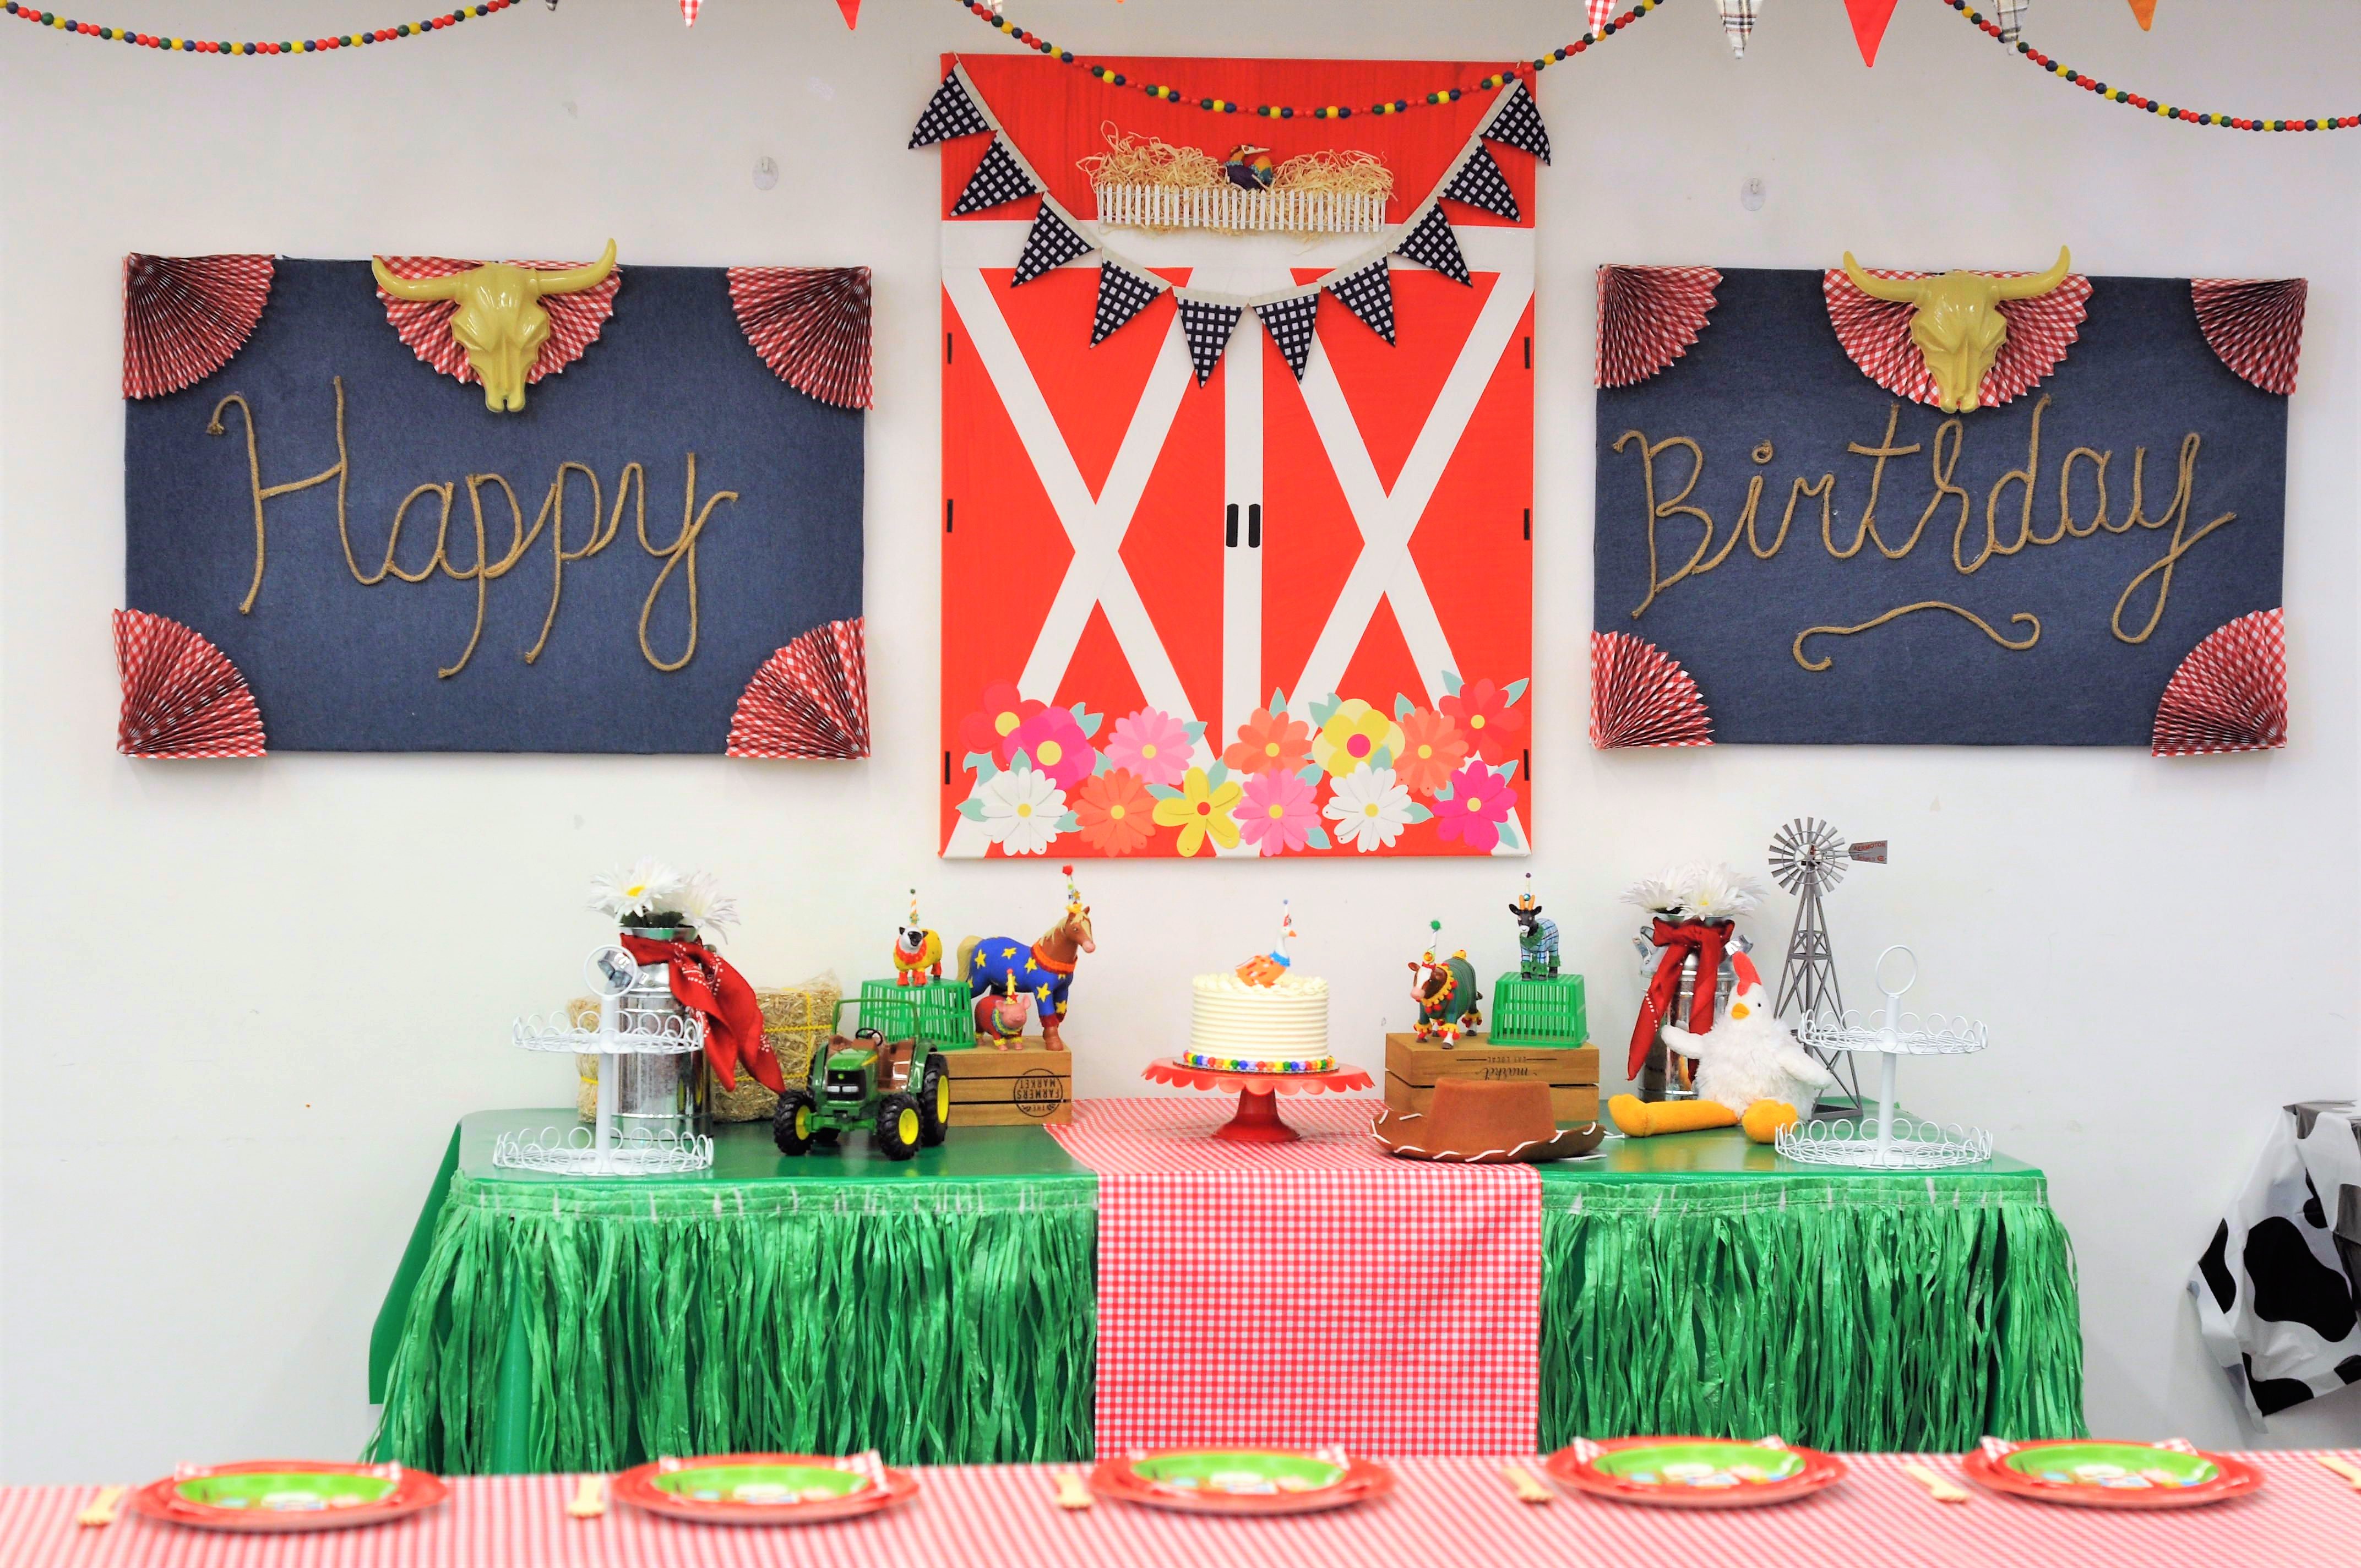 Art Party Decor + Backdrop from a Rustic Art Birthday Party on